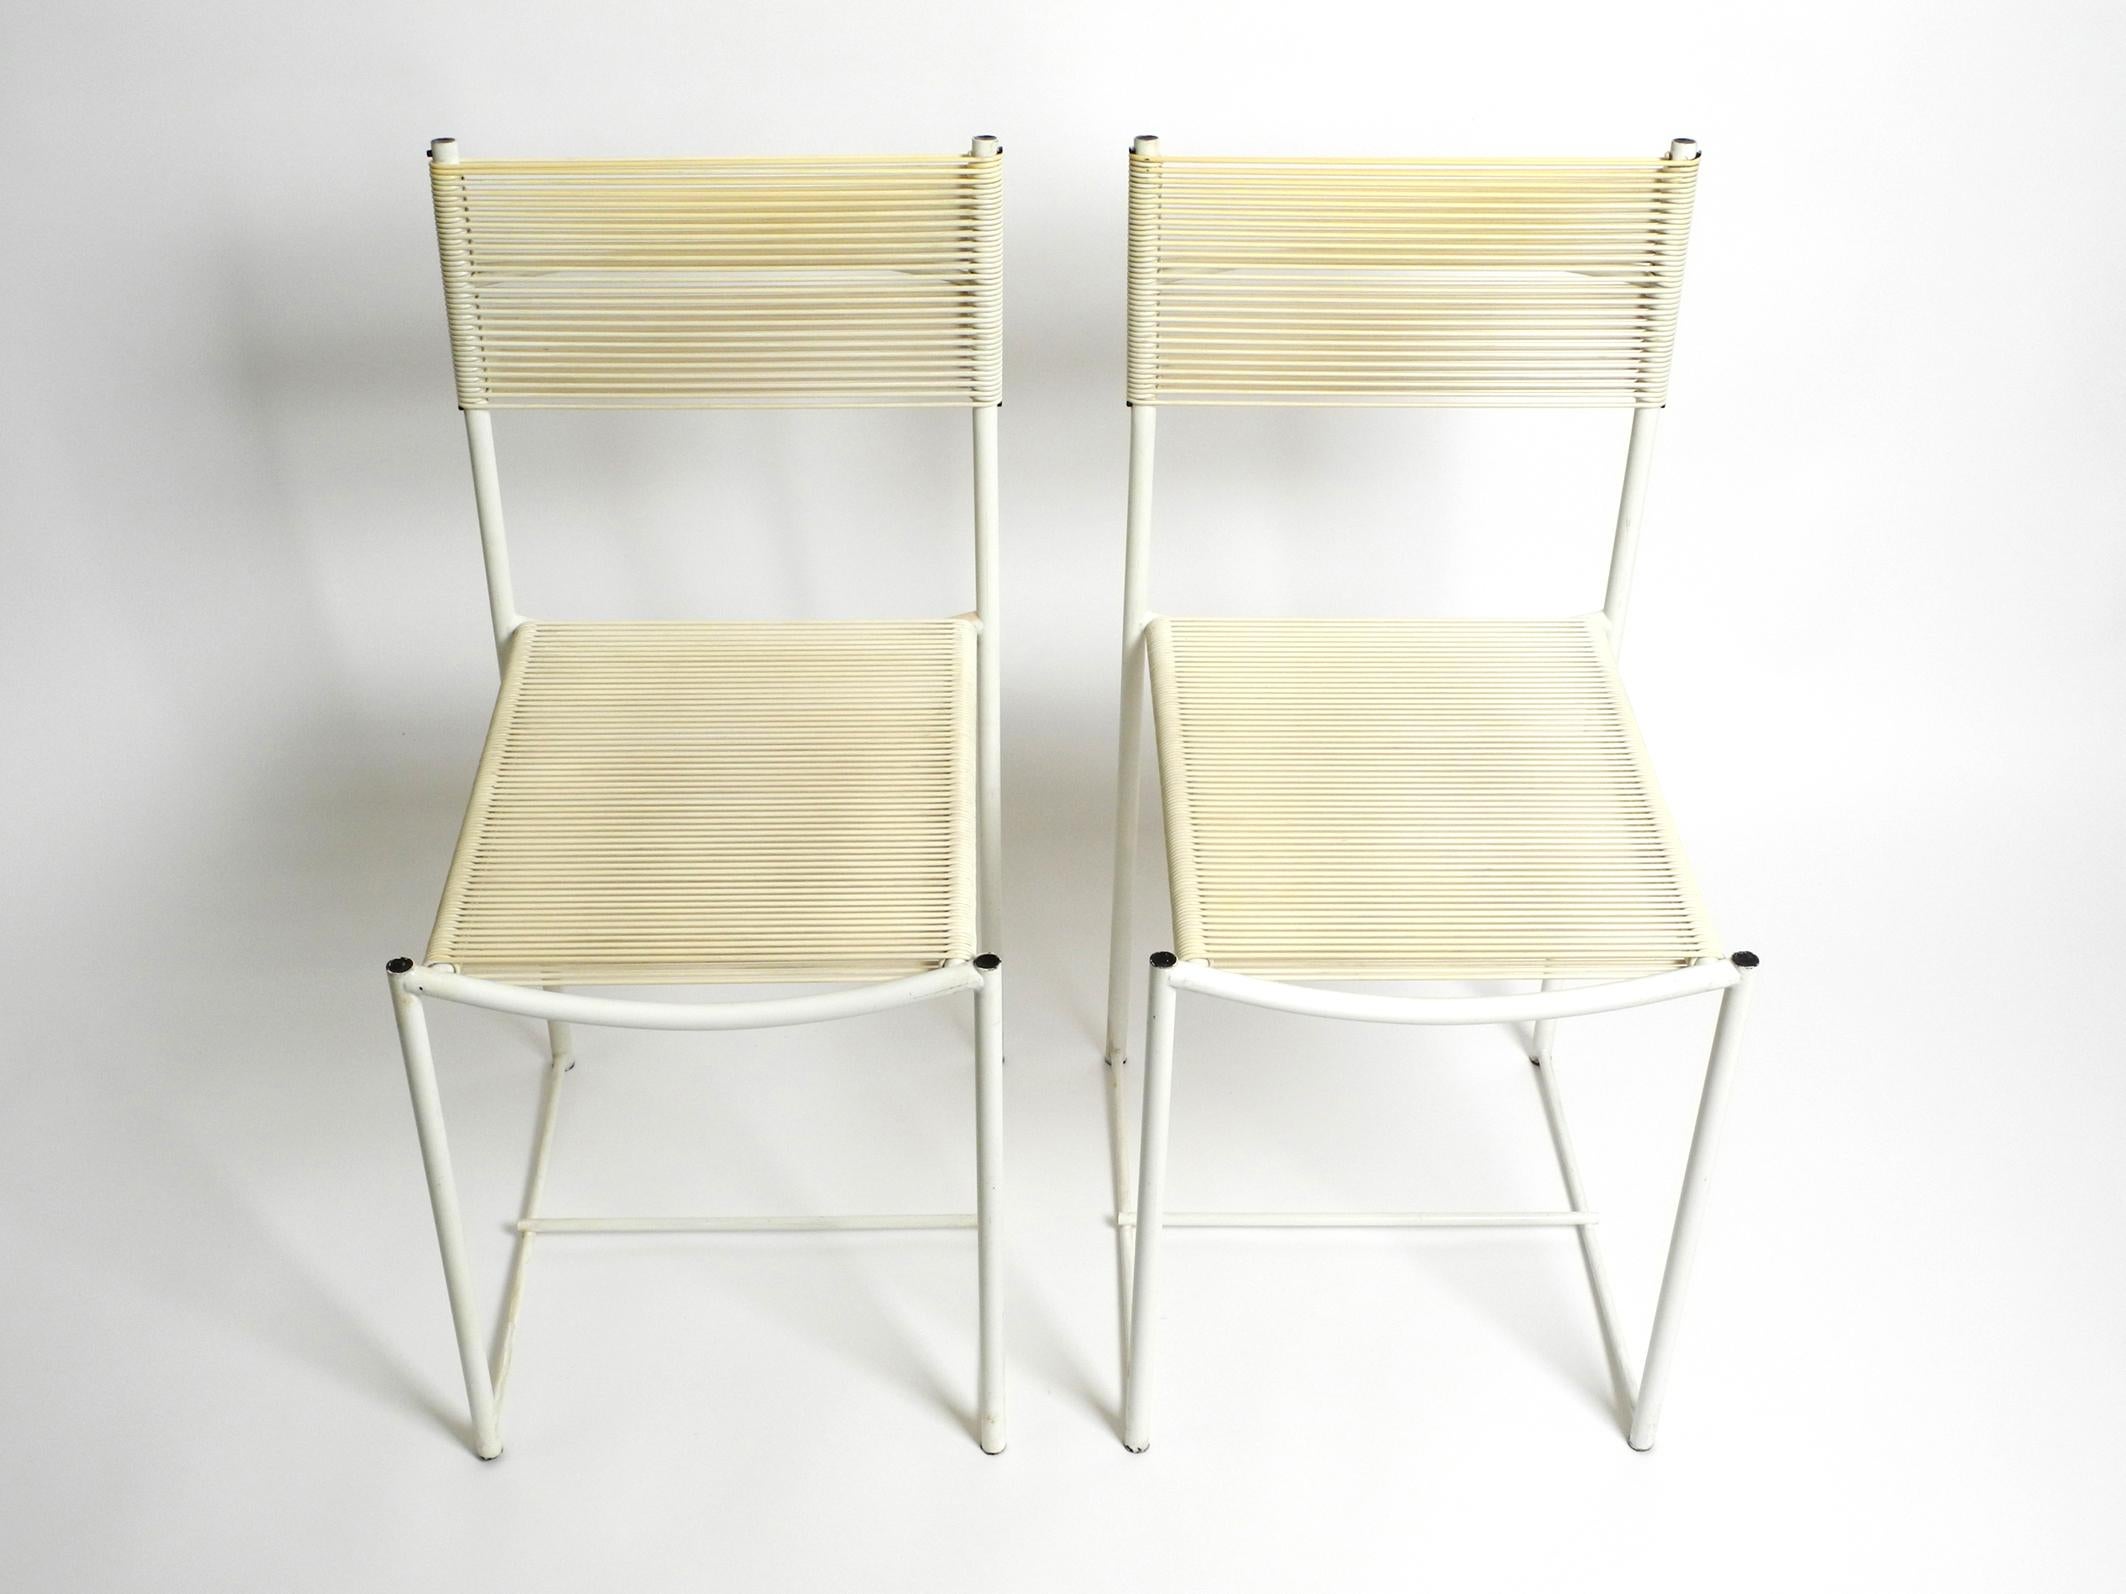 Pair of 70's original Spagetti chairs in white by Giandomenico Belotti. Manufacturer is Alias. Made in Italy. Rare in white lacquered frame and white seats + backrests. Beautiful minimalist Italian design of the Pop Art era. In good condition with